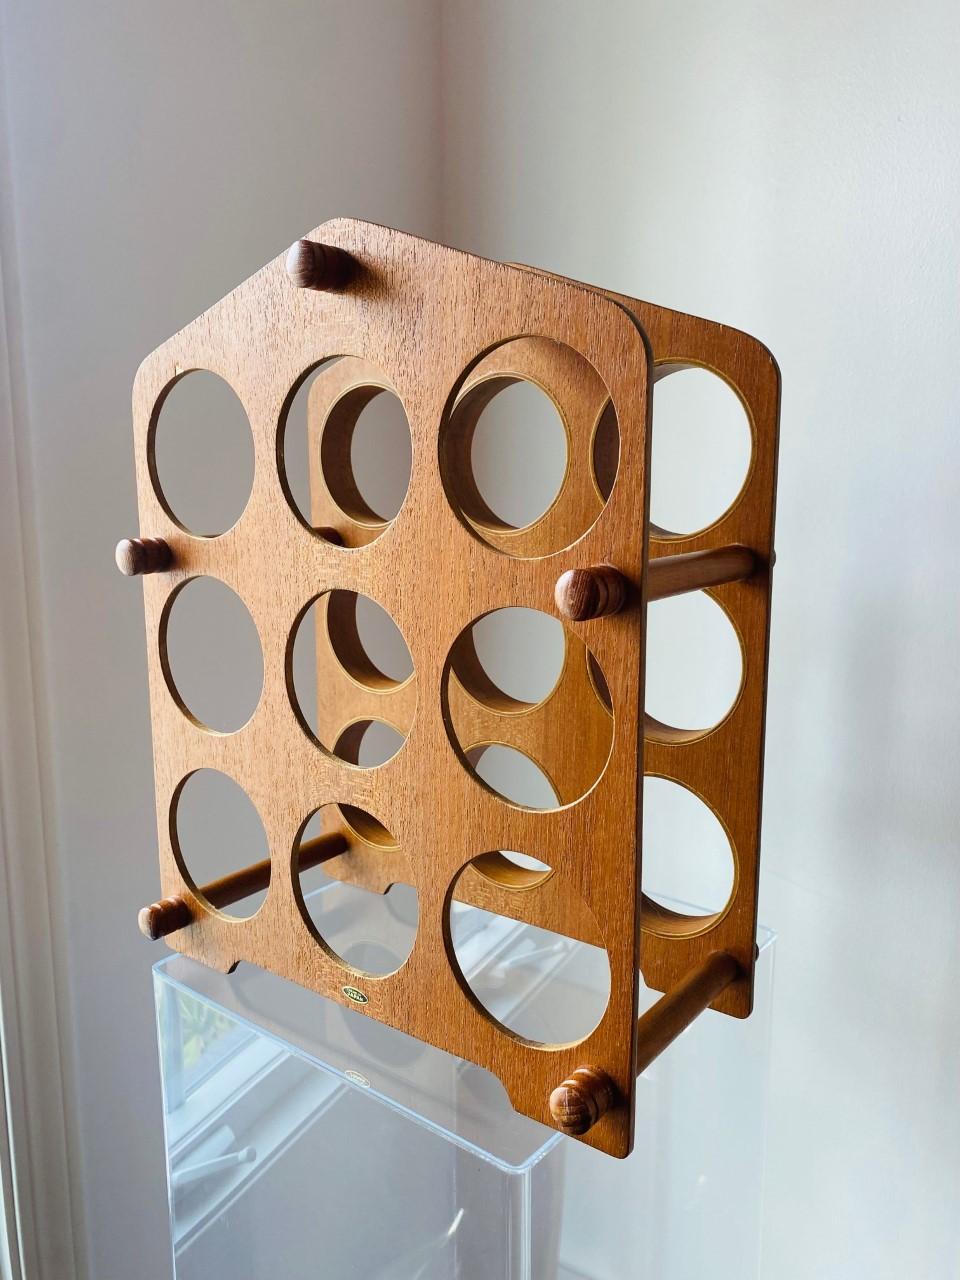 Vintage teak wine rack that embodies the minimal scandinavian cool of Mid Century. This piece embodies a very cool design in rare vintage molded teak. Capacity for 9 bottles, makes it a must have for your bar. Minimalist and cool with signature made